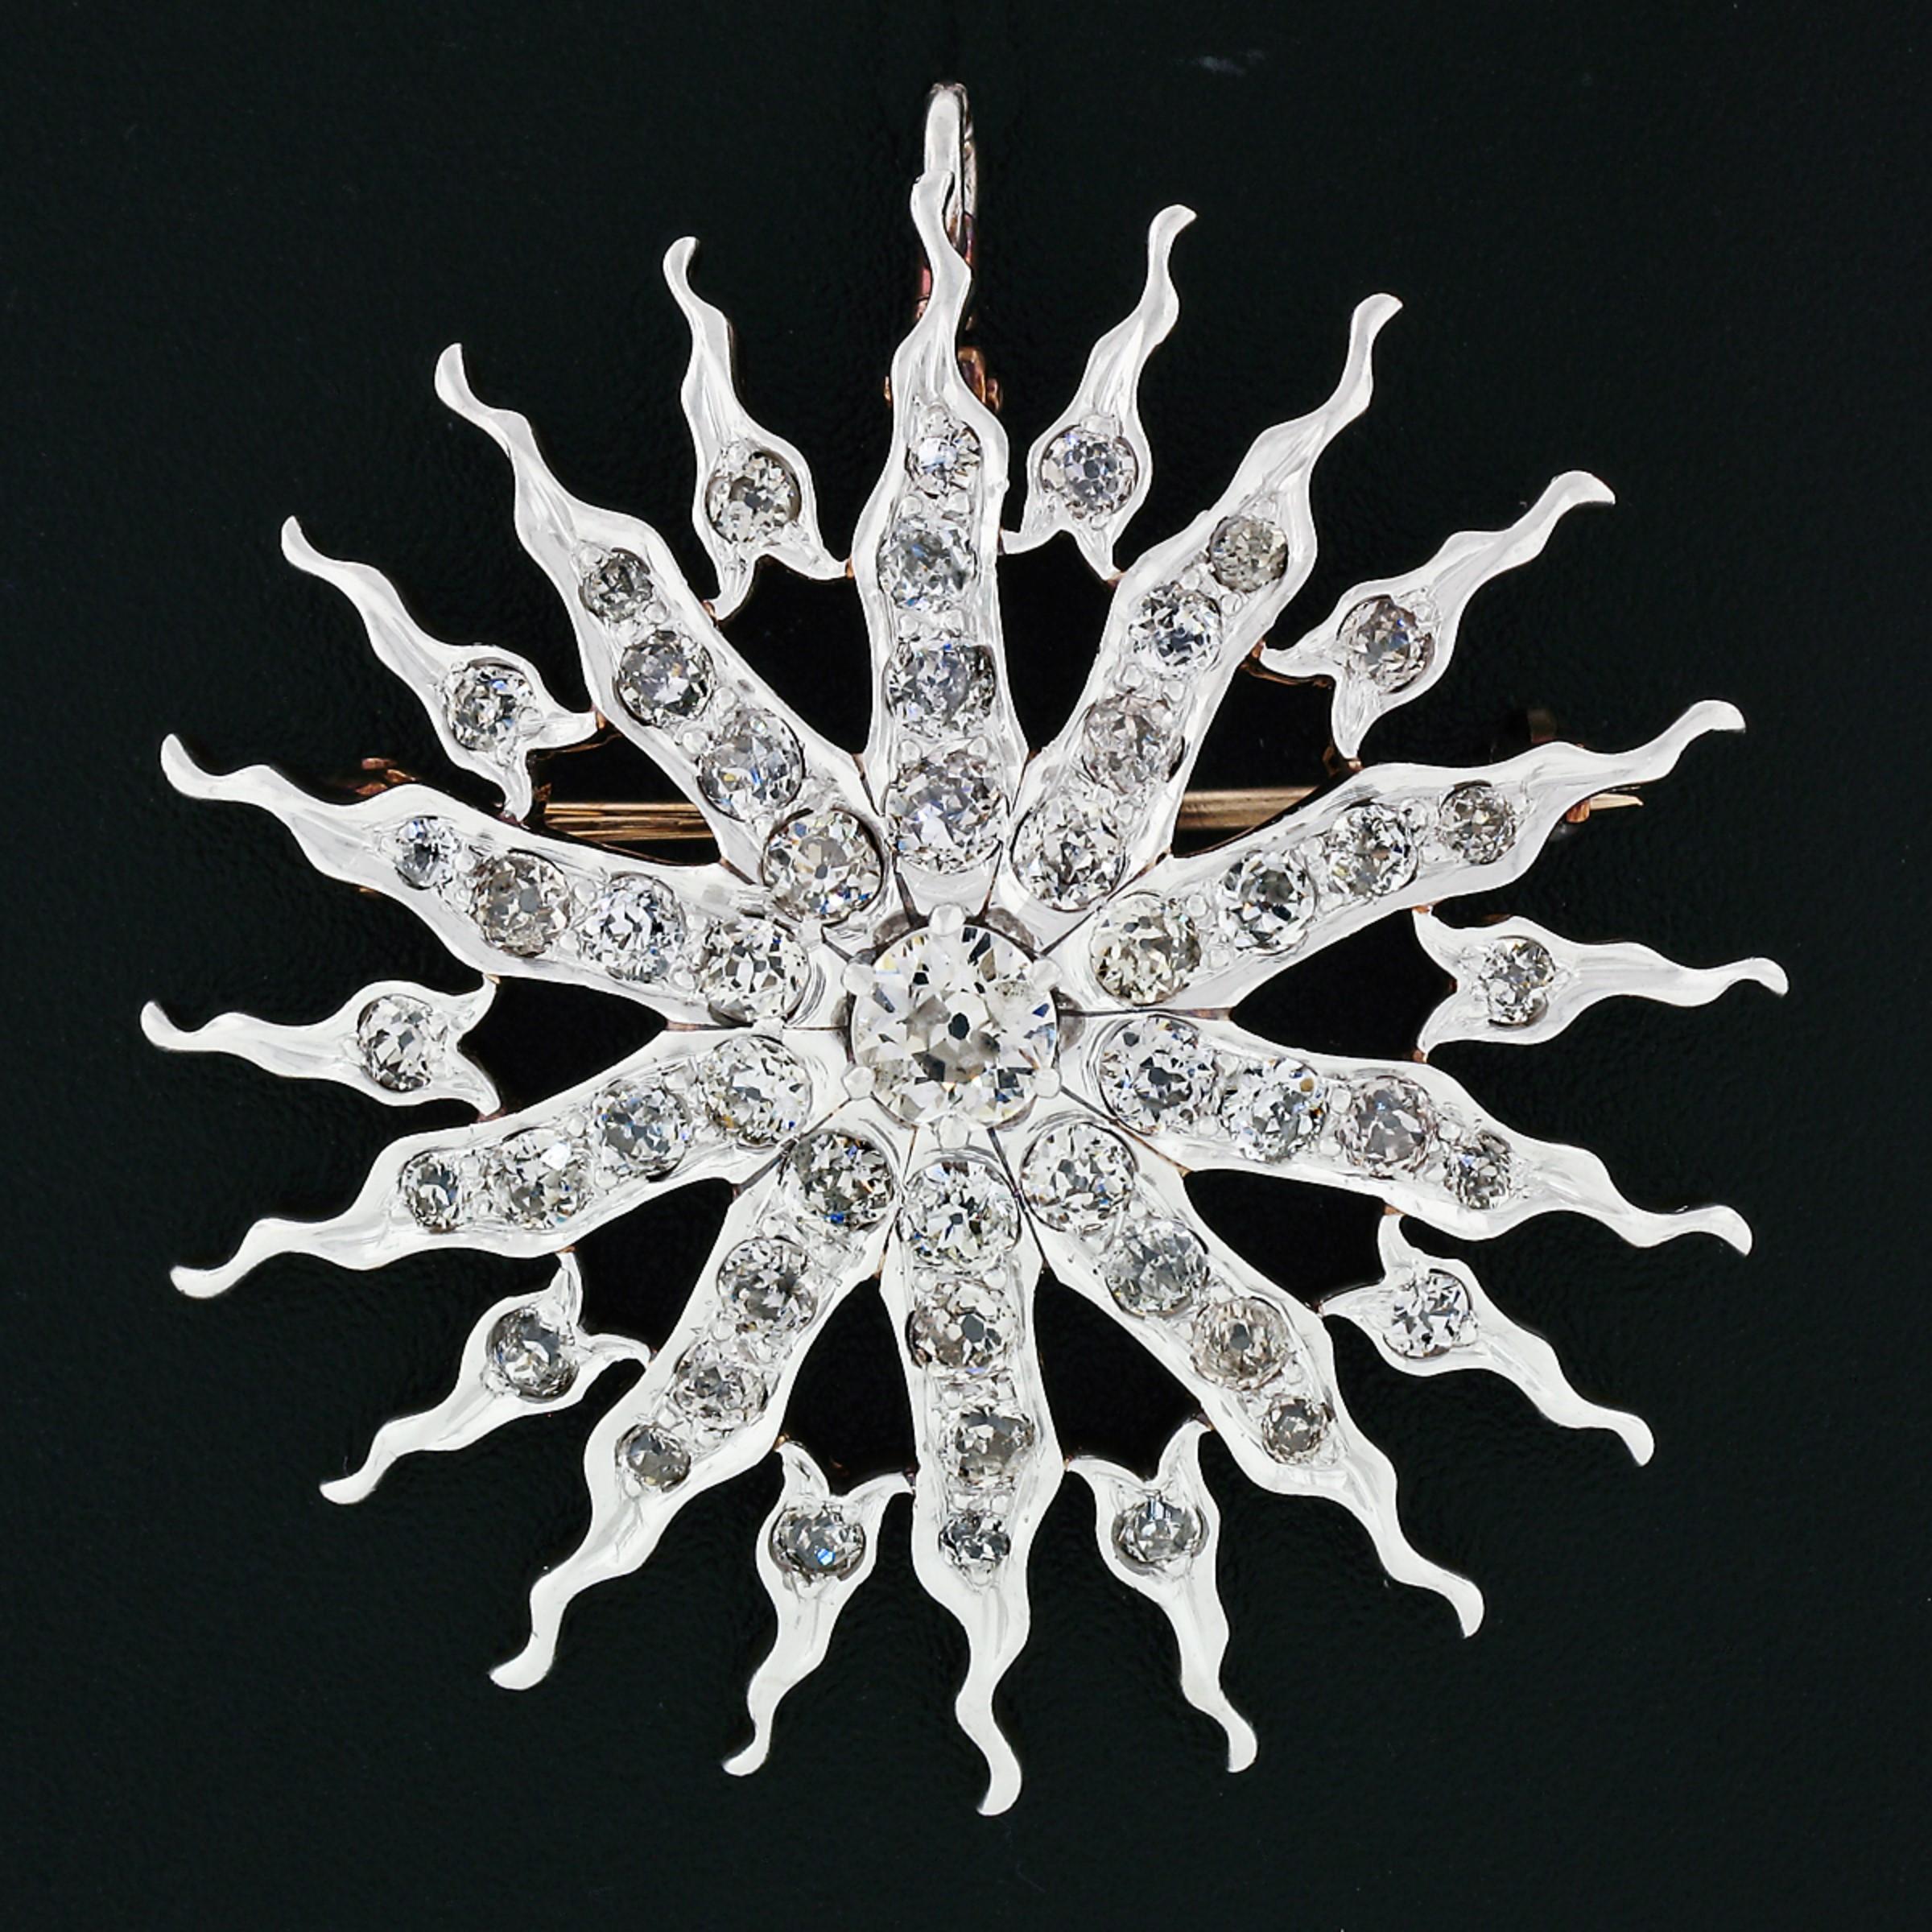 This gorgeous antique brooch/pendant was crafted during the Edwardian era from solid 14k gold and platinum top. It features a large, approximately 0.40 carats old European cut diamonds prong set at the center of the large sunburst design. The wavy